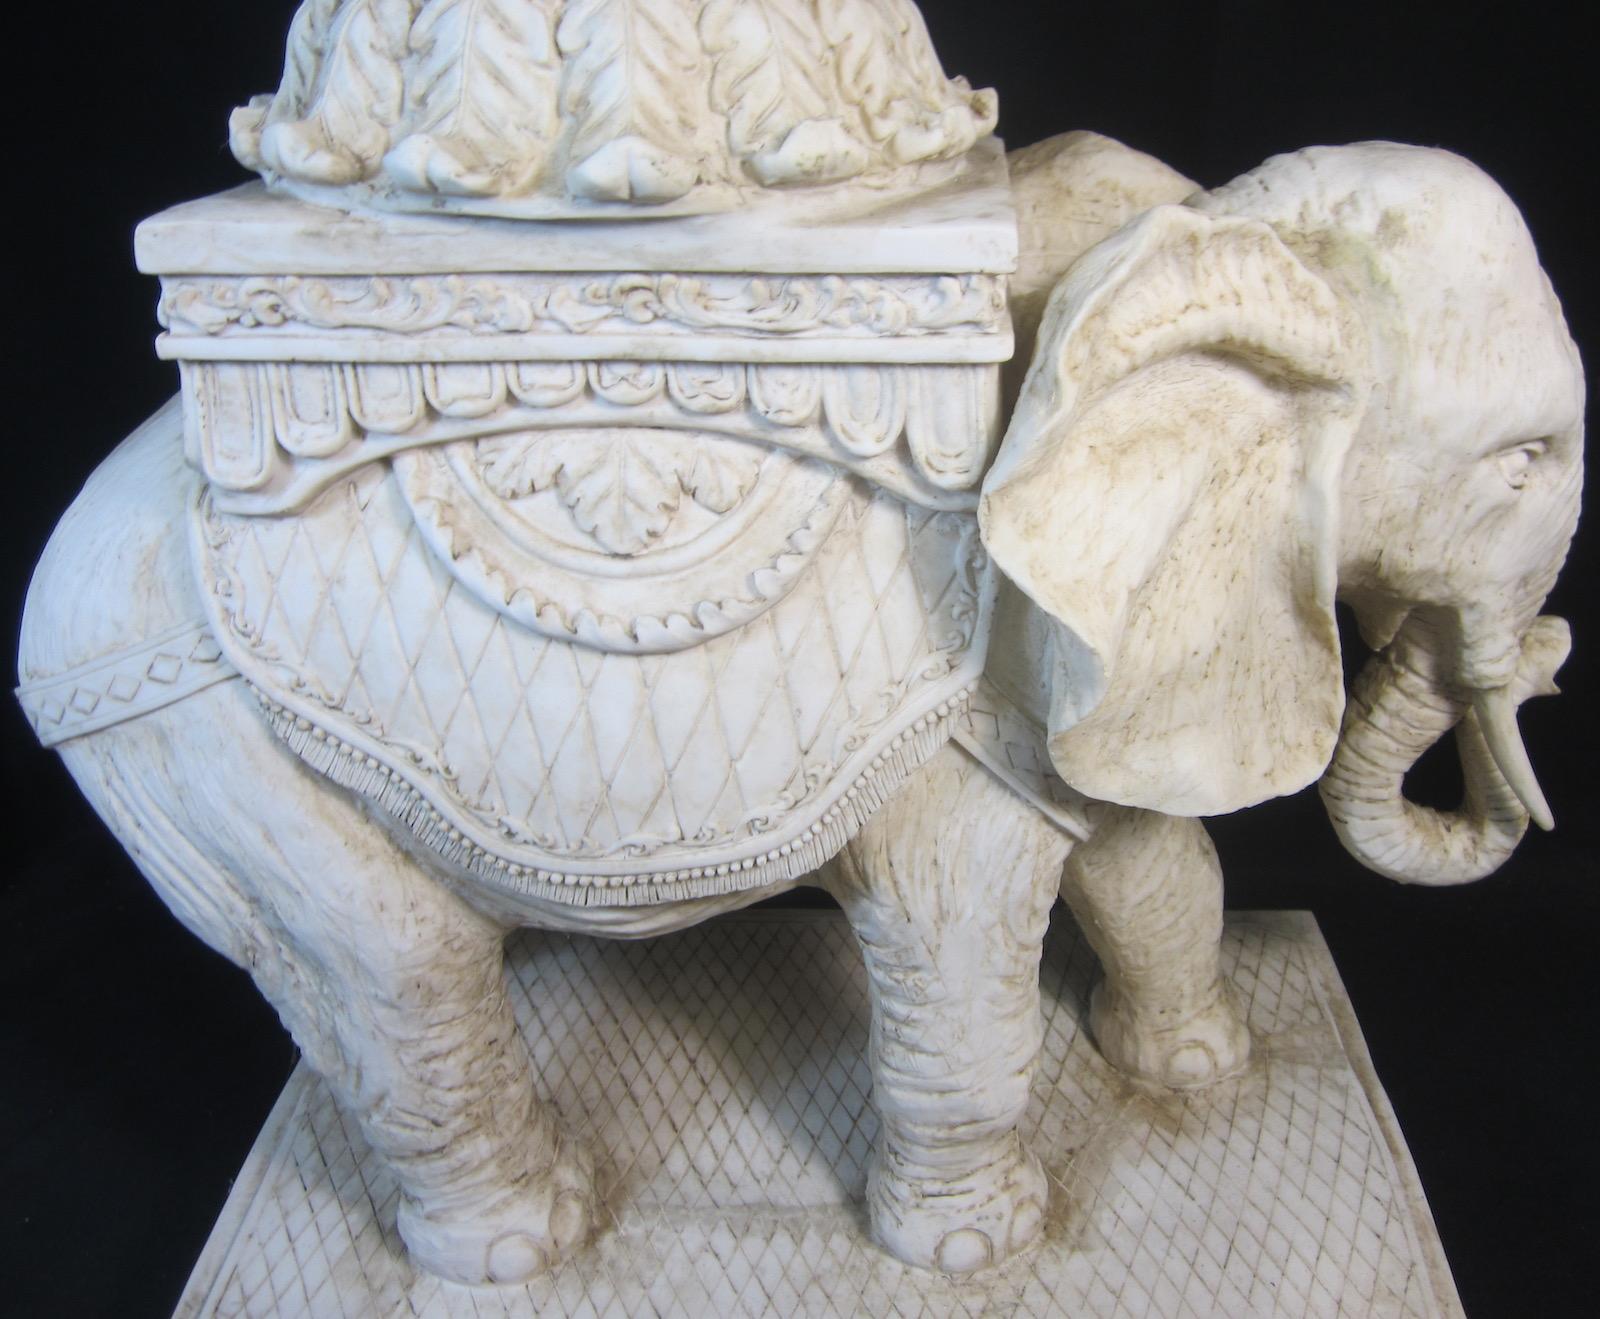 Elephant table, 
round glass top, 
composite material, 
weighs 22kg, 
Measures: 55 x 58cm high.